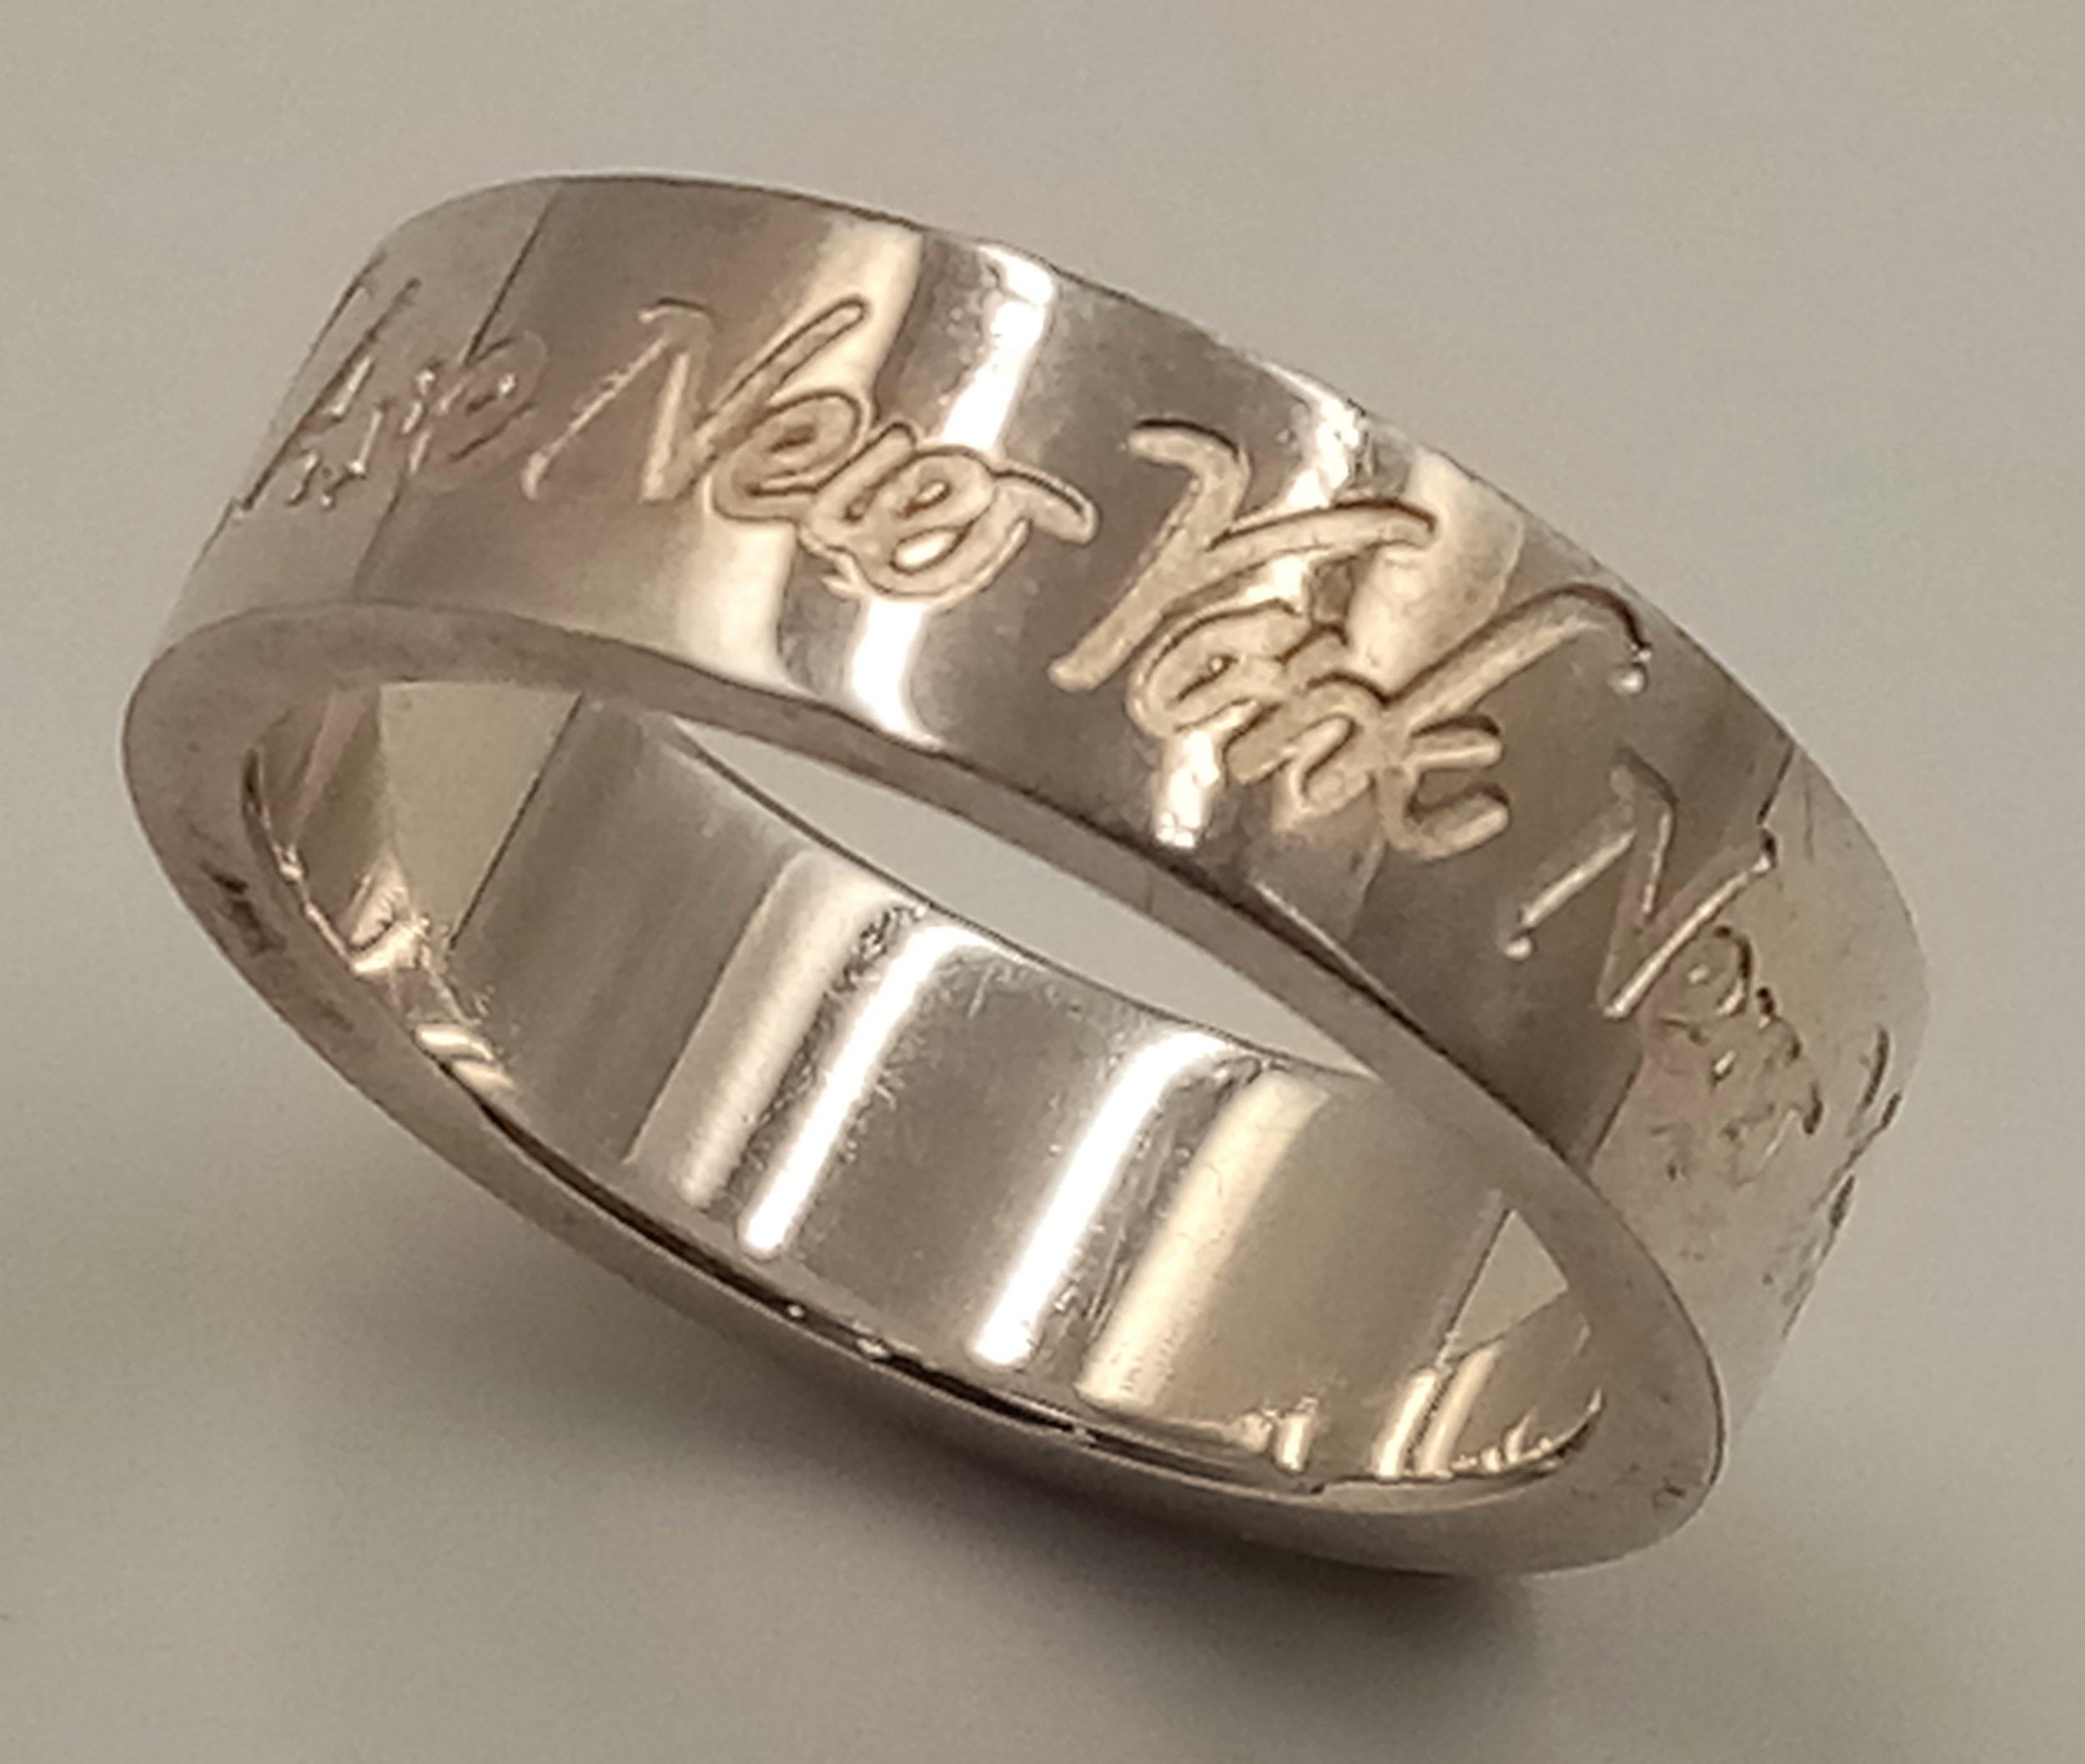 A TIFFANY & CO STERLING SILVER BAND RING, 727 NEW YORK FIFTH AVENUE. Size N, 5g total weight. Ref: - Image 5 of 5